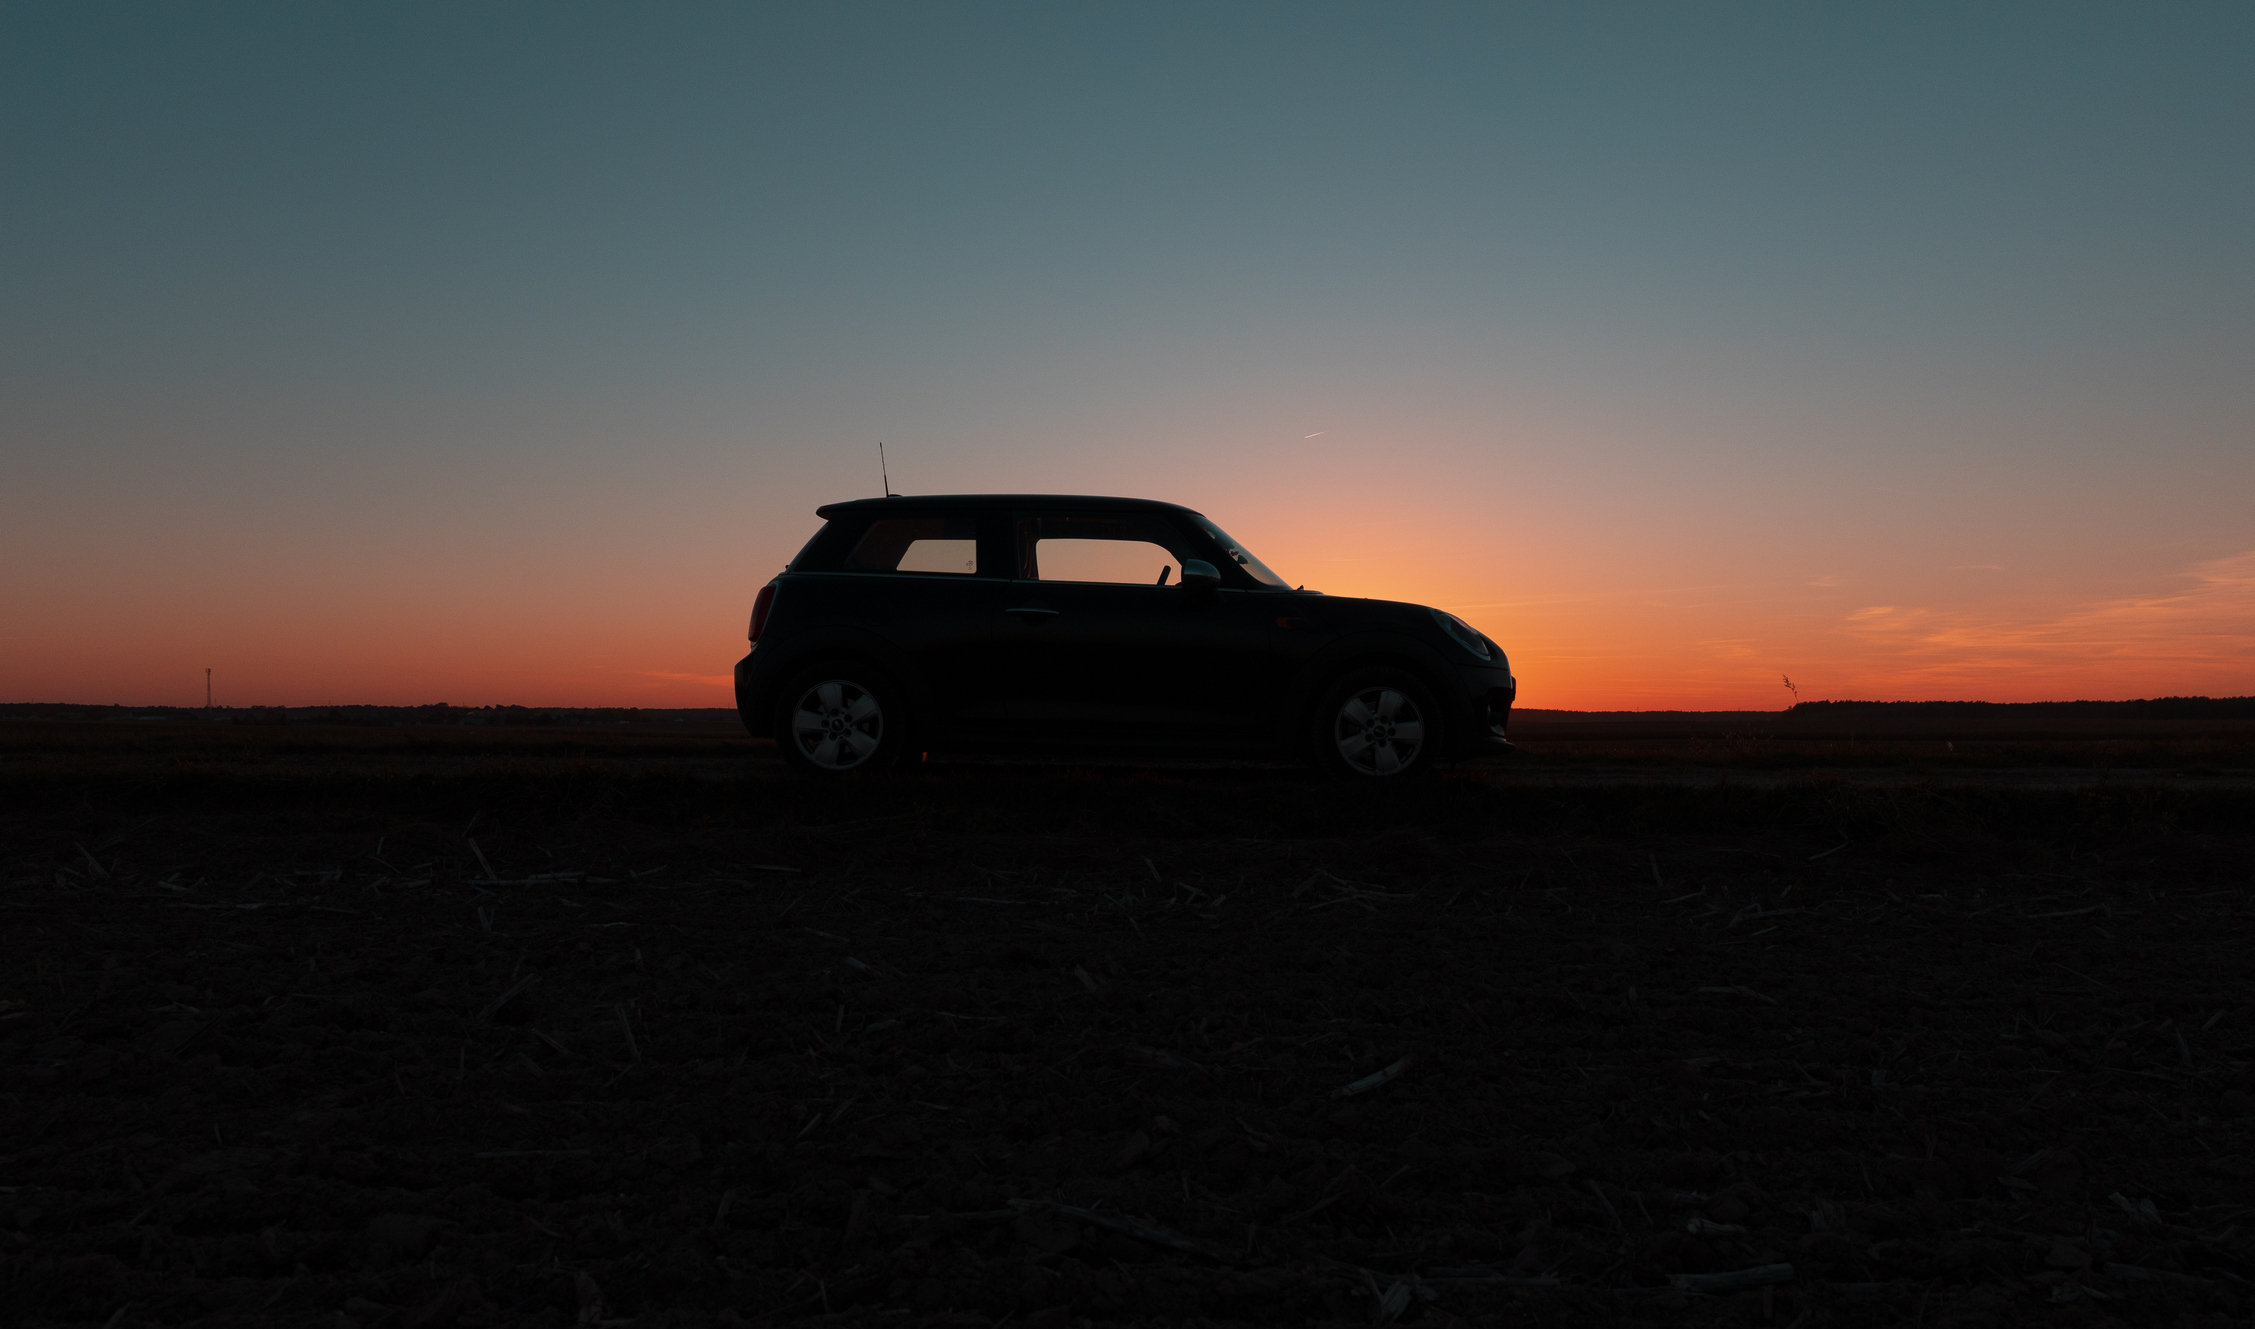 Silhouette of a car against a sunset sky